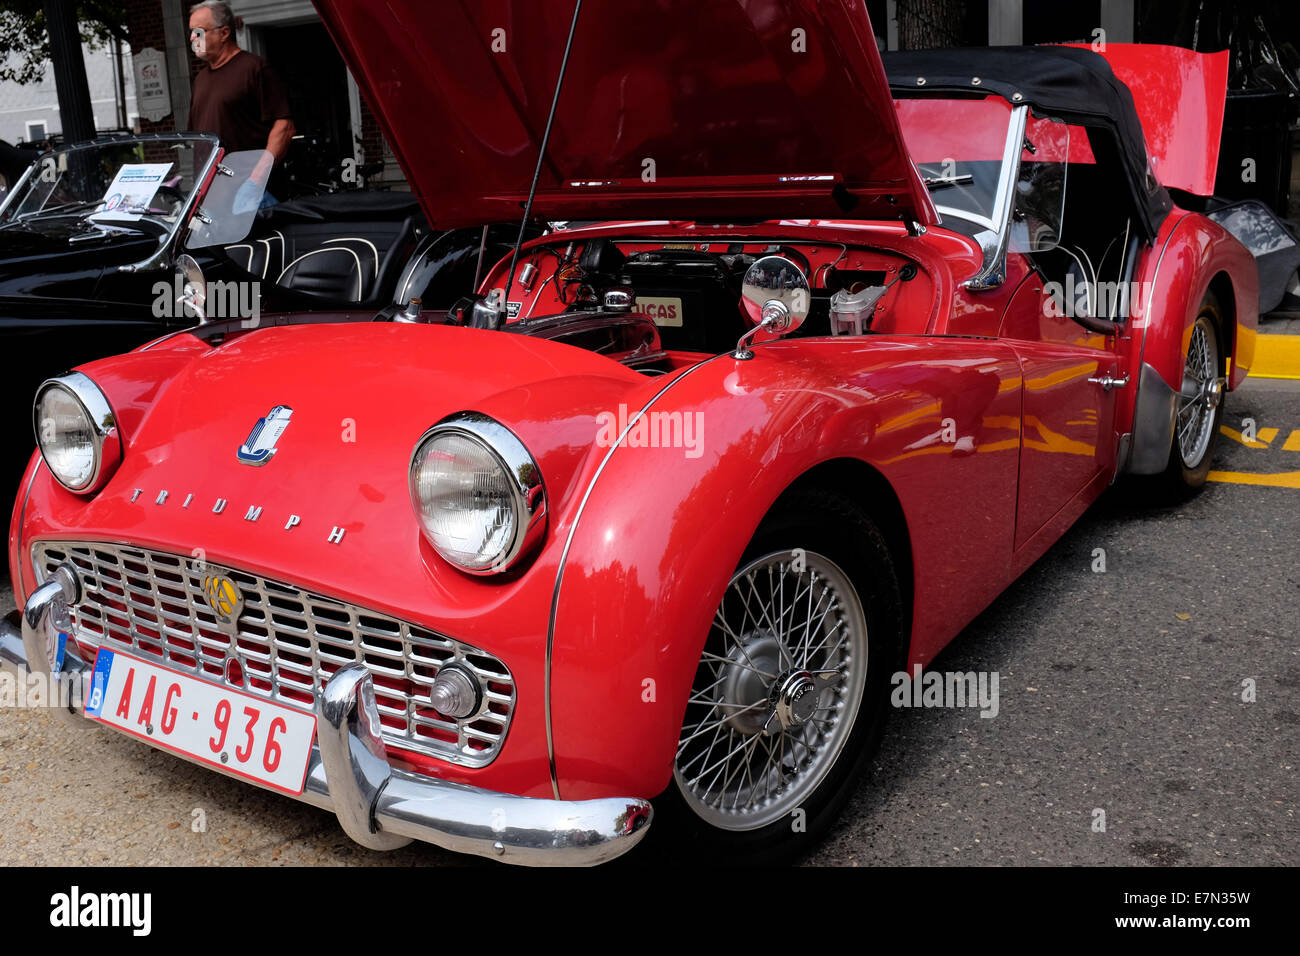 Old Triumph at the Brits on the Bech Car Show in Ocean Grove, NJ USA Stock Photo